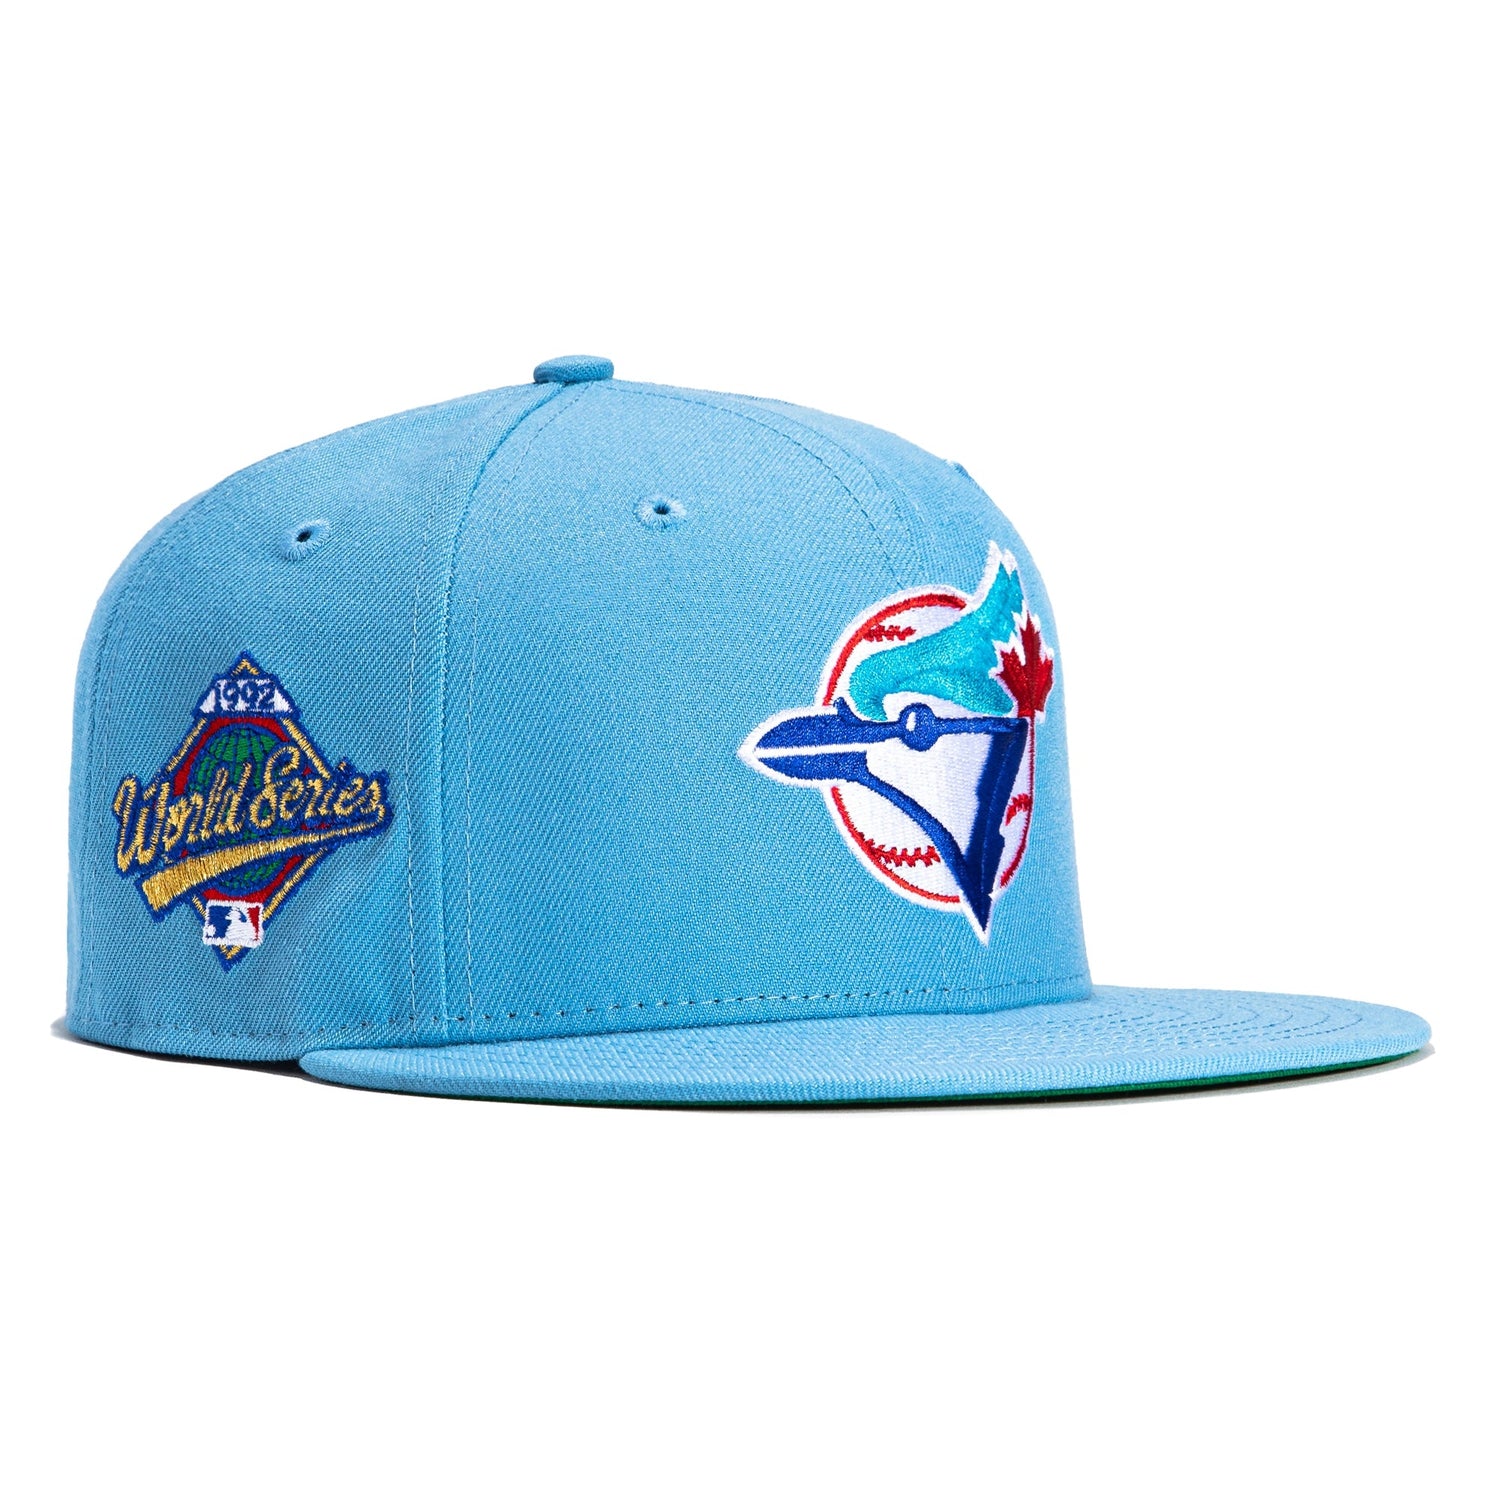 Paper Planes X Toronto Blue Jays 59Fifty Fitted Hat